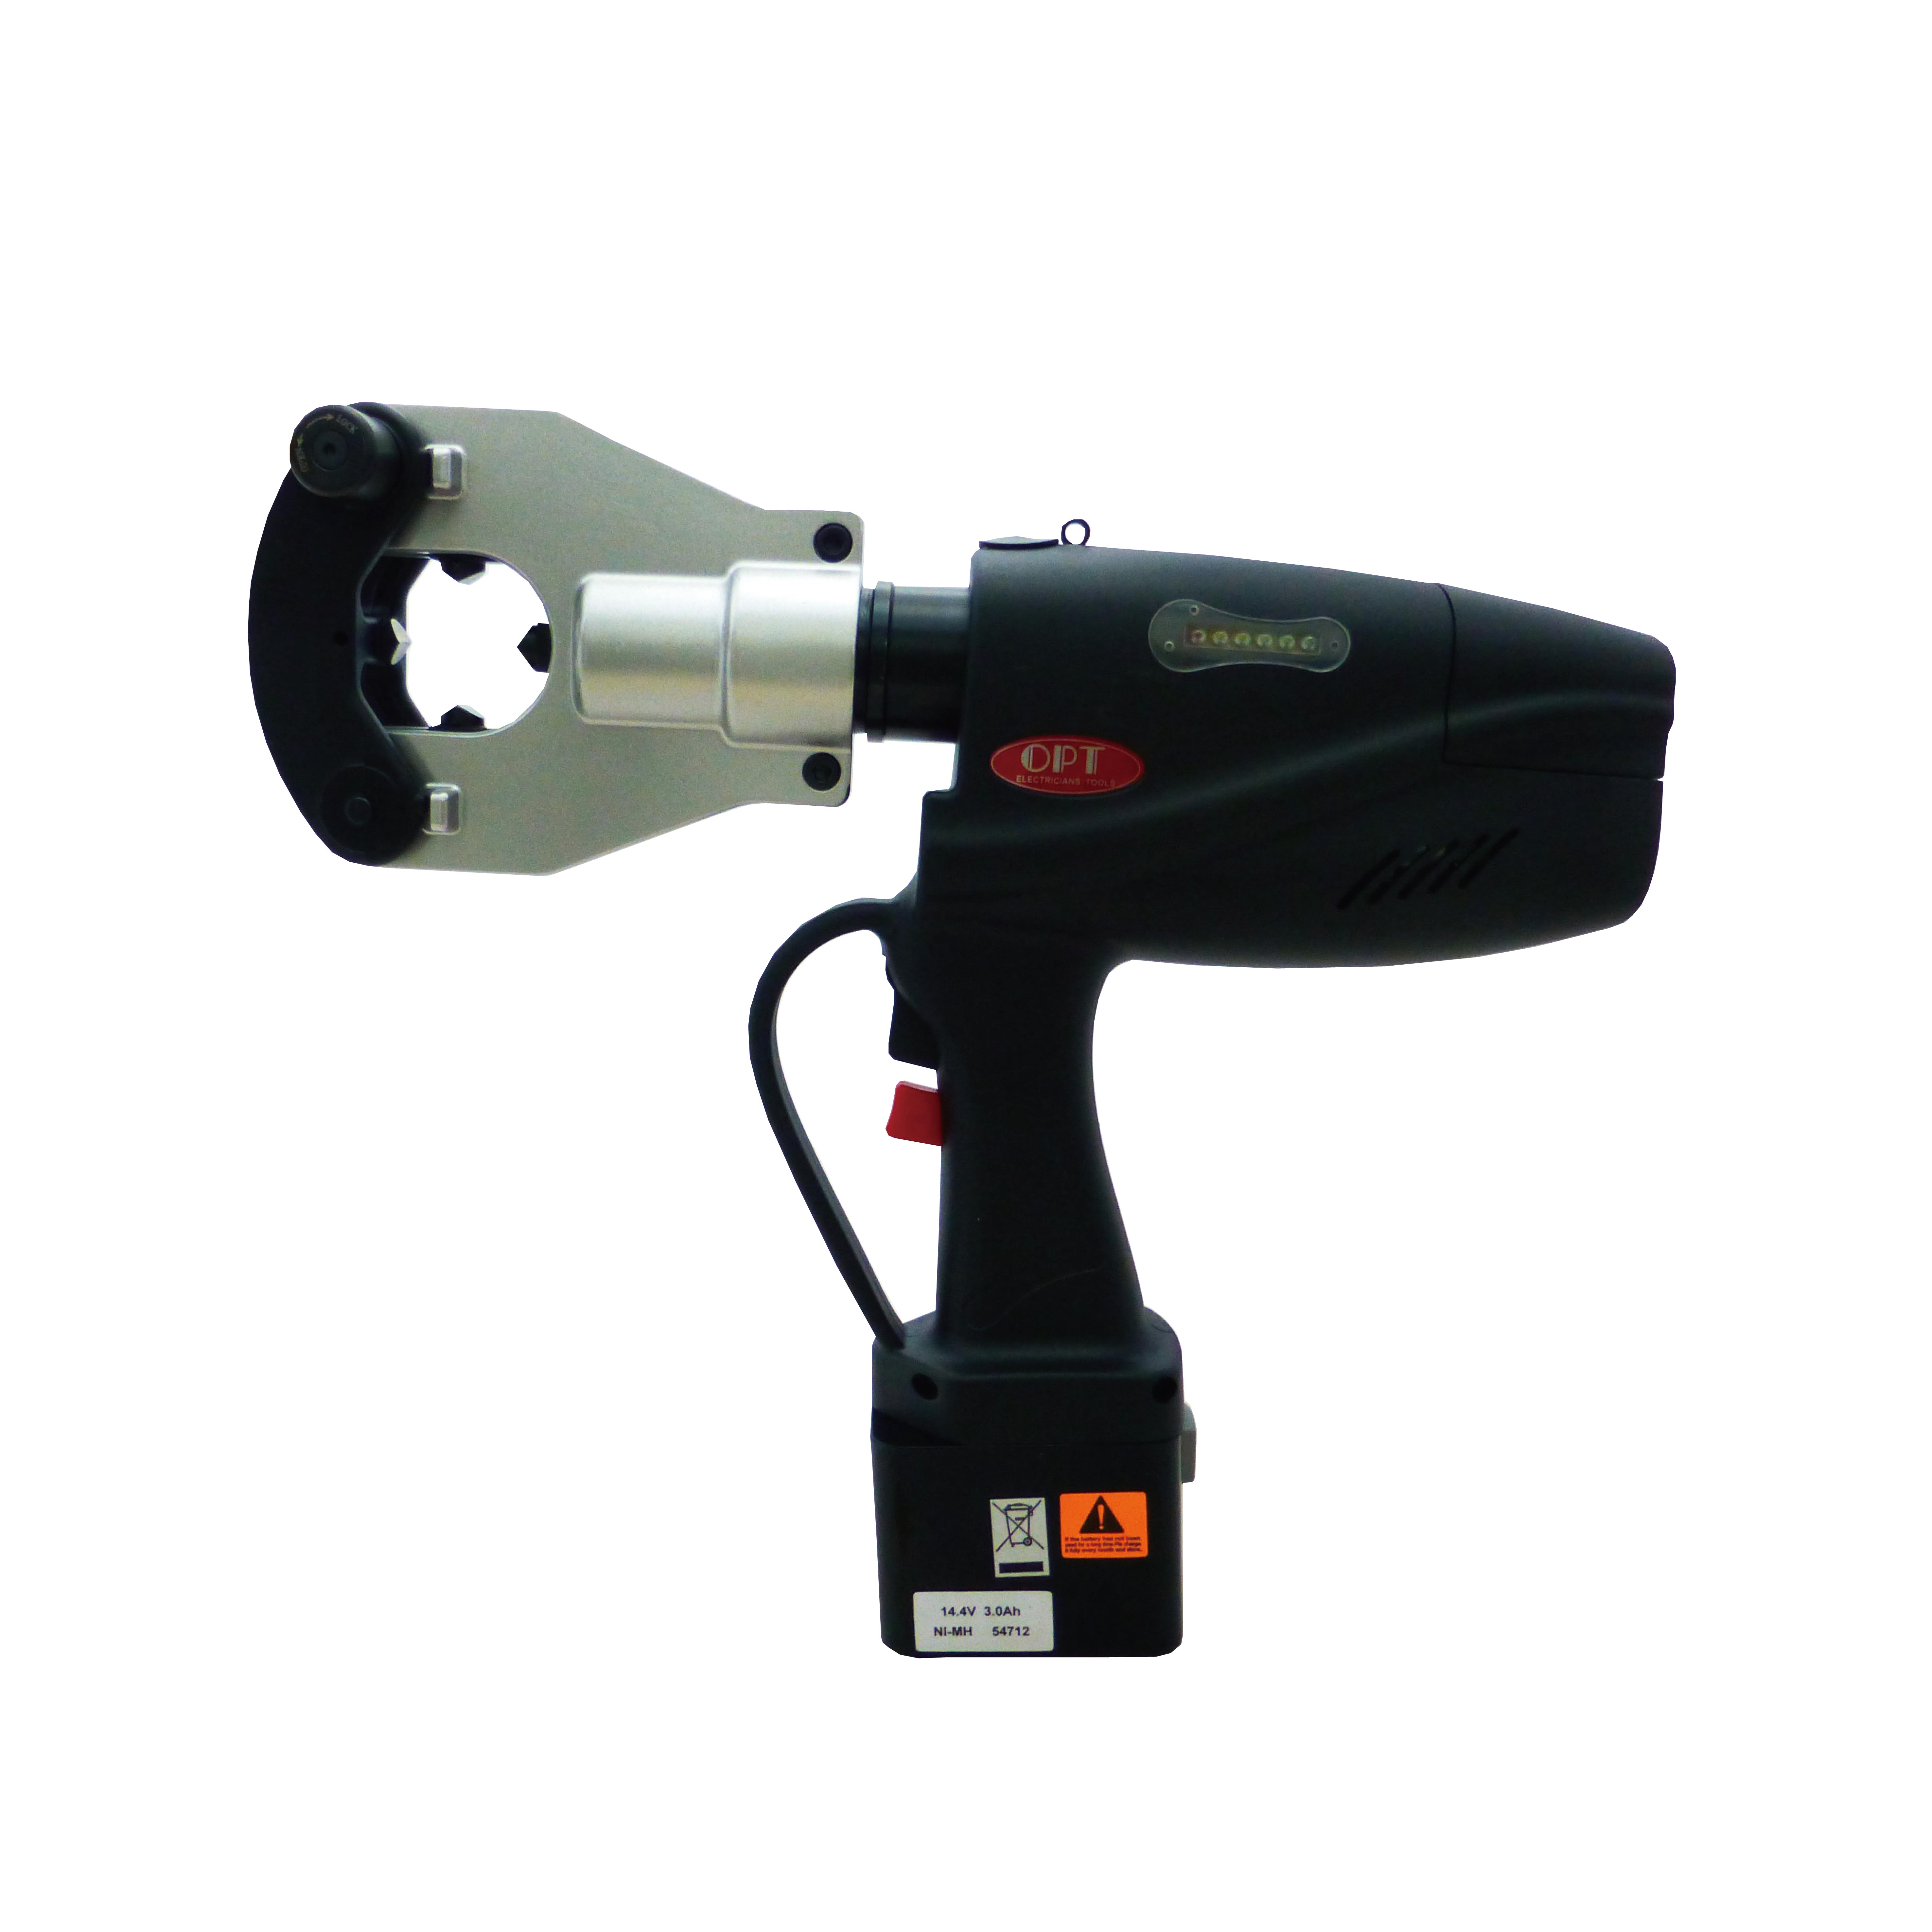 EPL-8 CORDLESS HYDRAULIC CRIMPING TOOLS-EPL-8 CORDLESS HYDRAULIC CRIMPING TOOLS